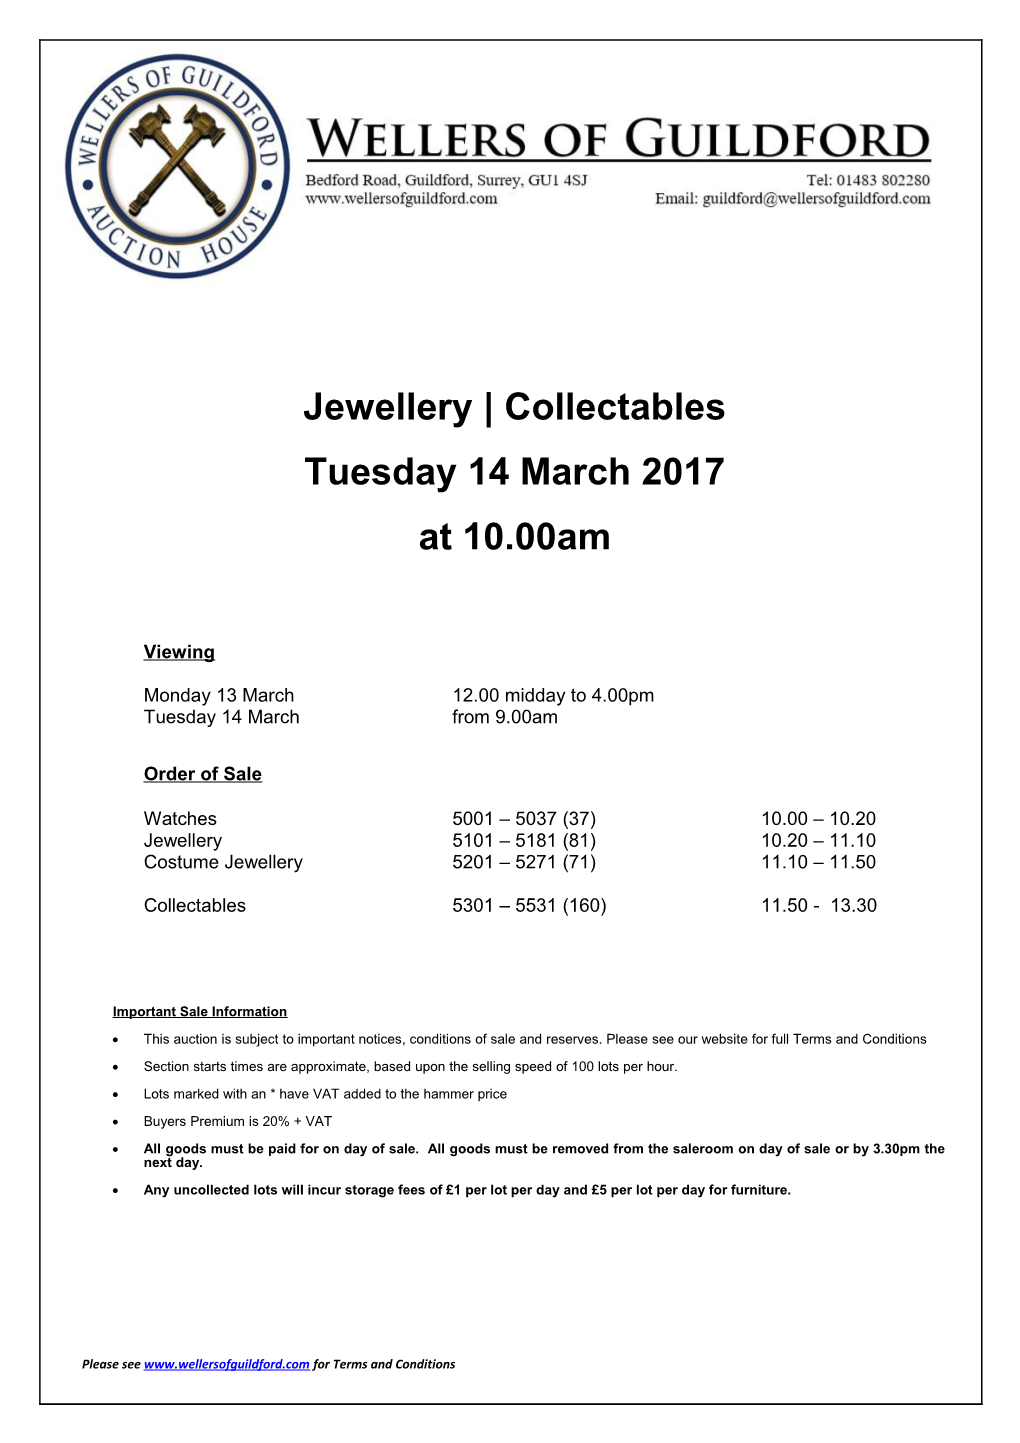 Jewellery Collectables